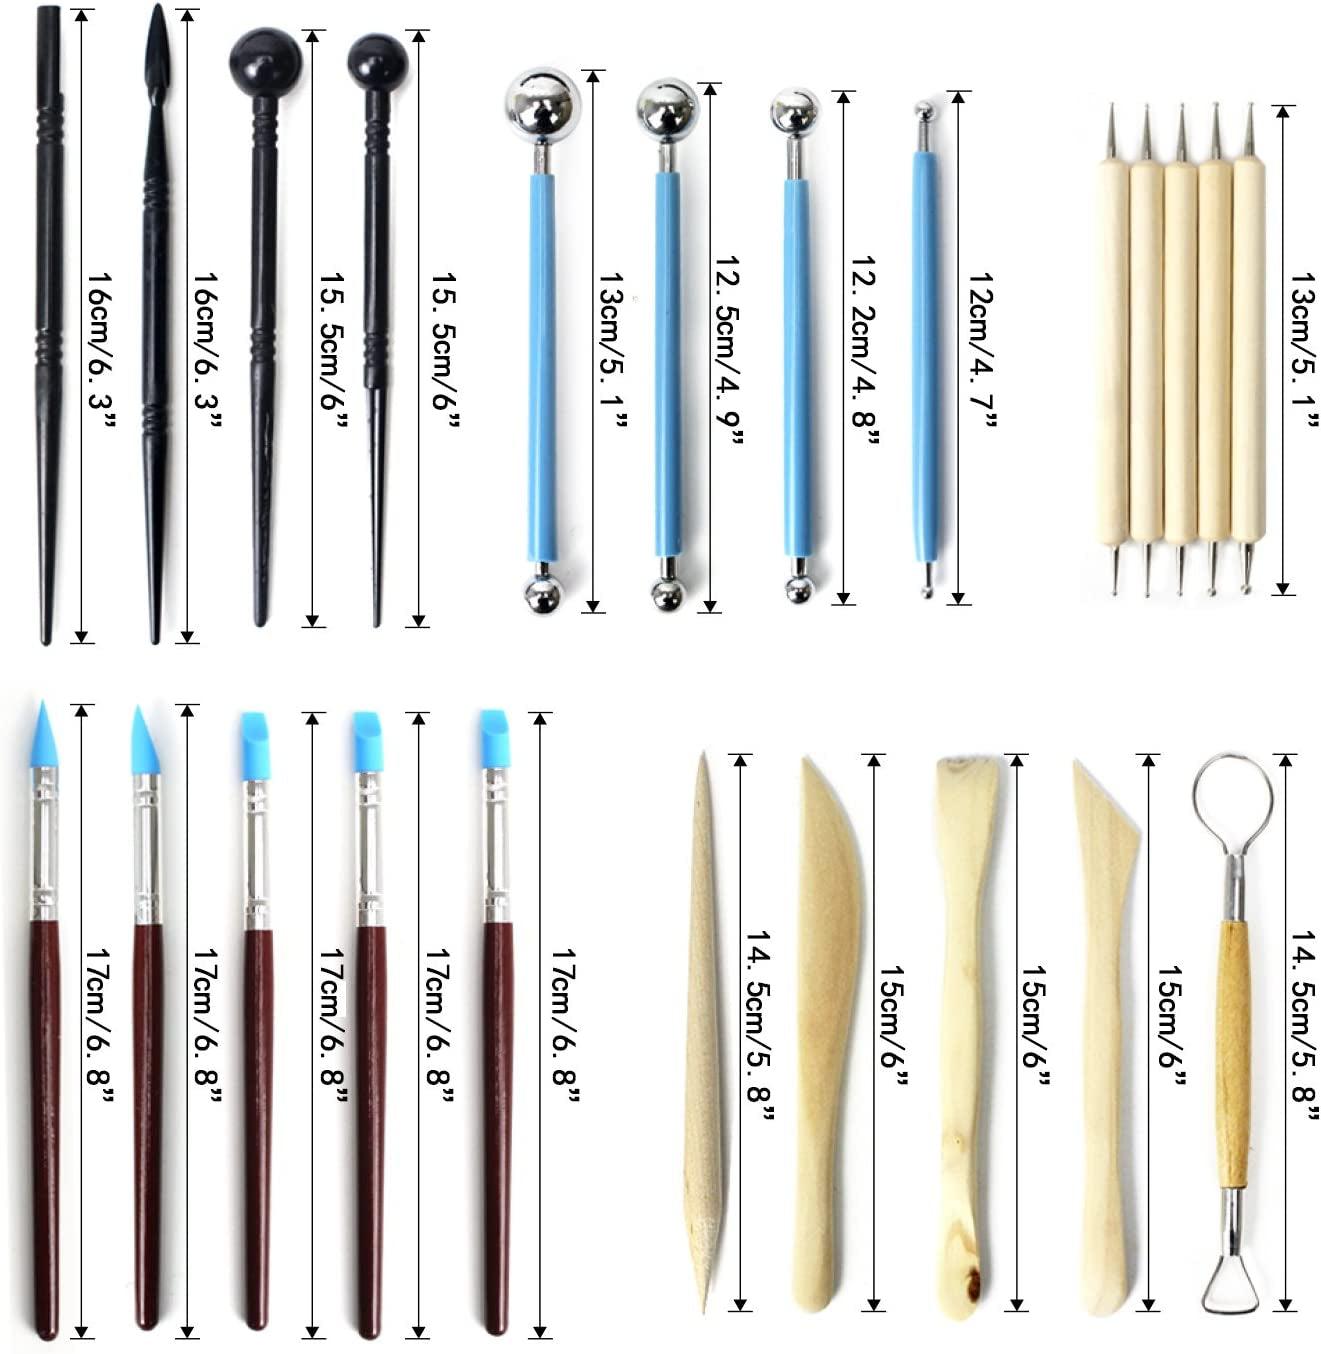 25pcs Clay Tools, DIY Sculpting Tools Set, Ceramics Polymer Clay Tool Kit,  For Pottery Modeling, Carving, Smoothing & Measuring, For Beginners